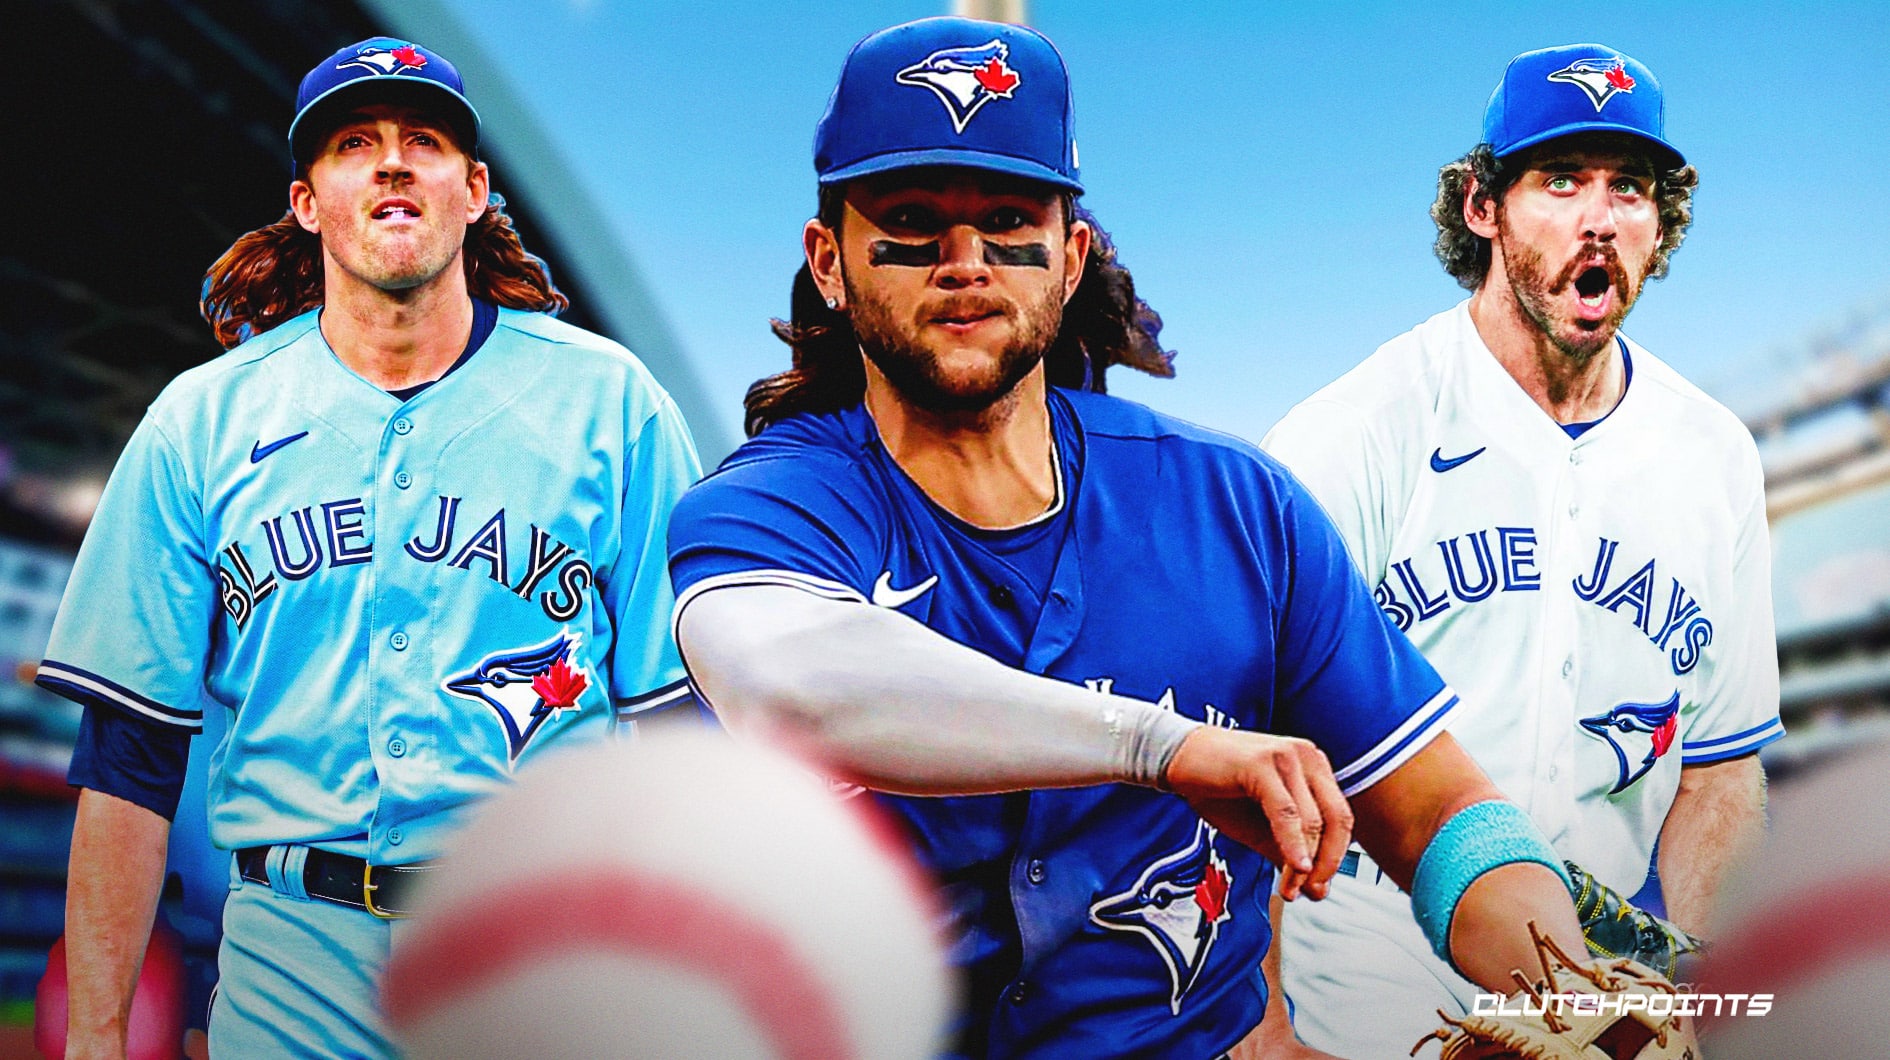 Four Blue Jays selected to 2023 MLB All-Star Game